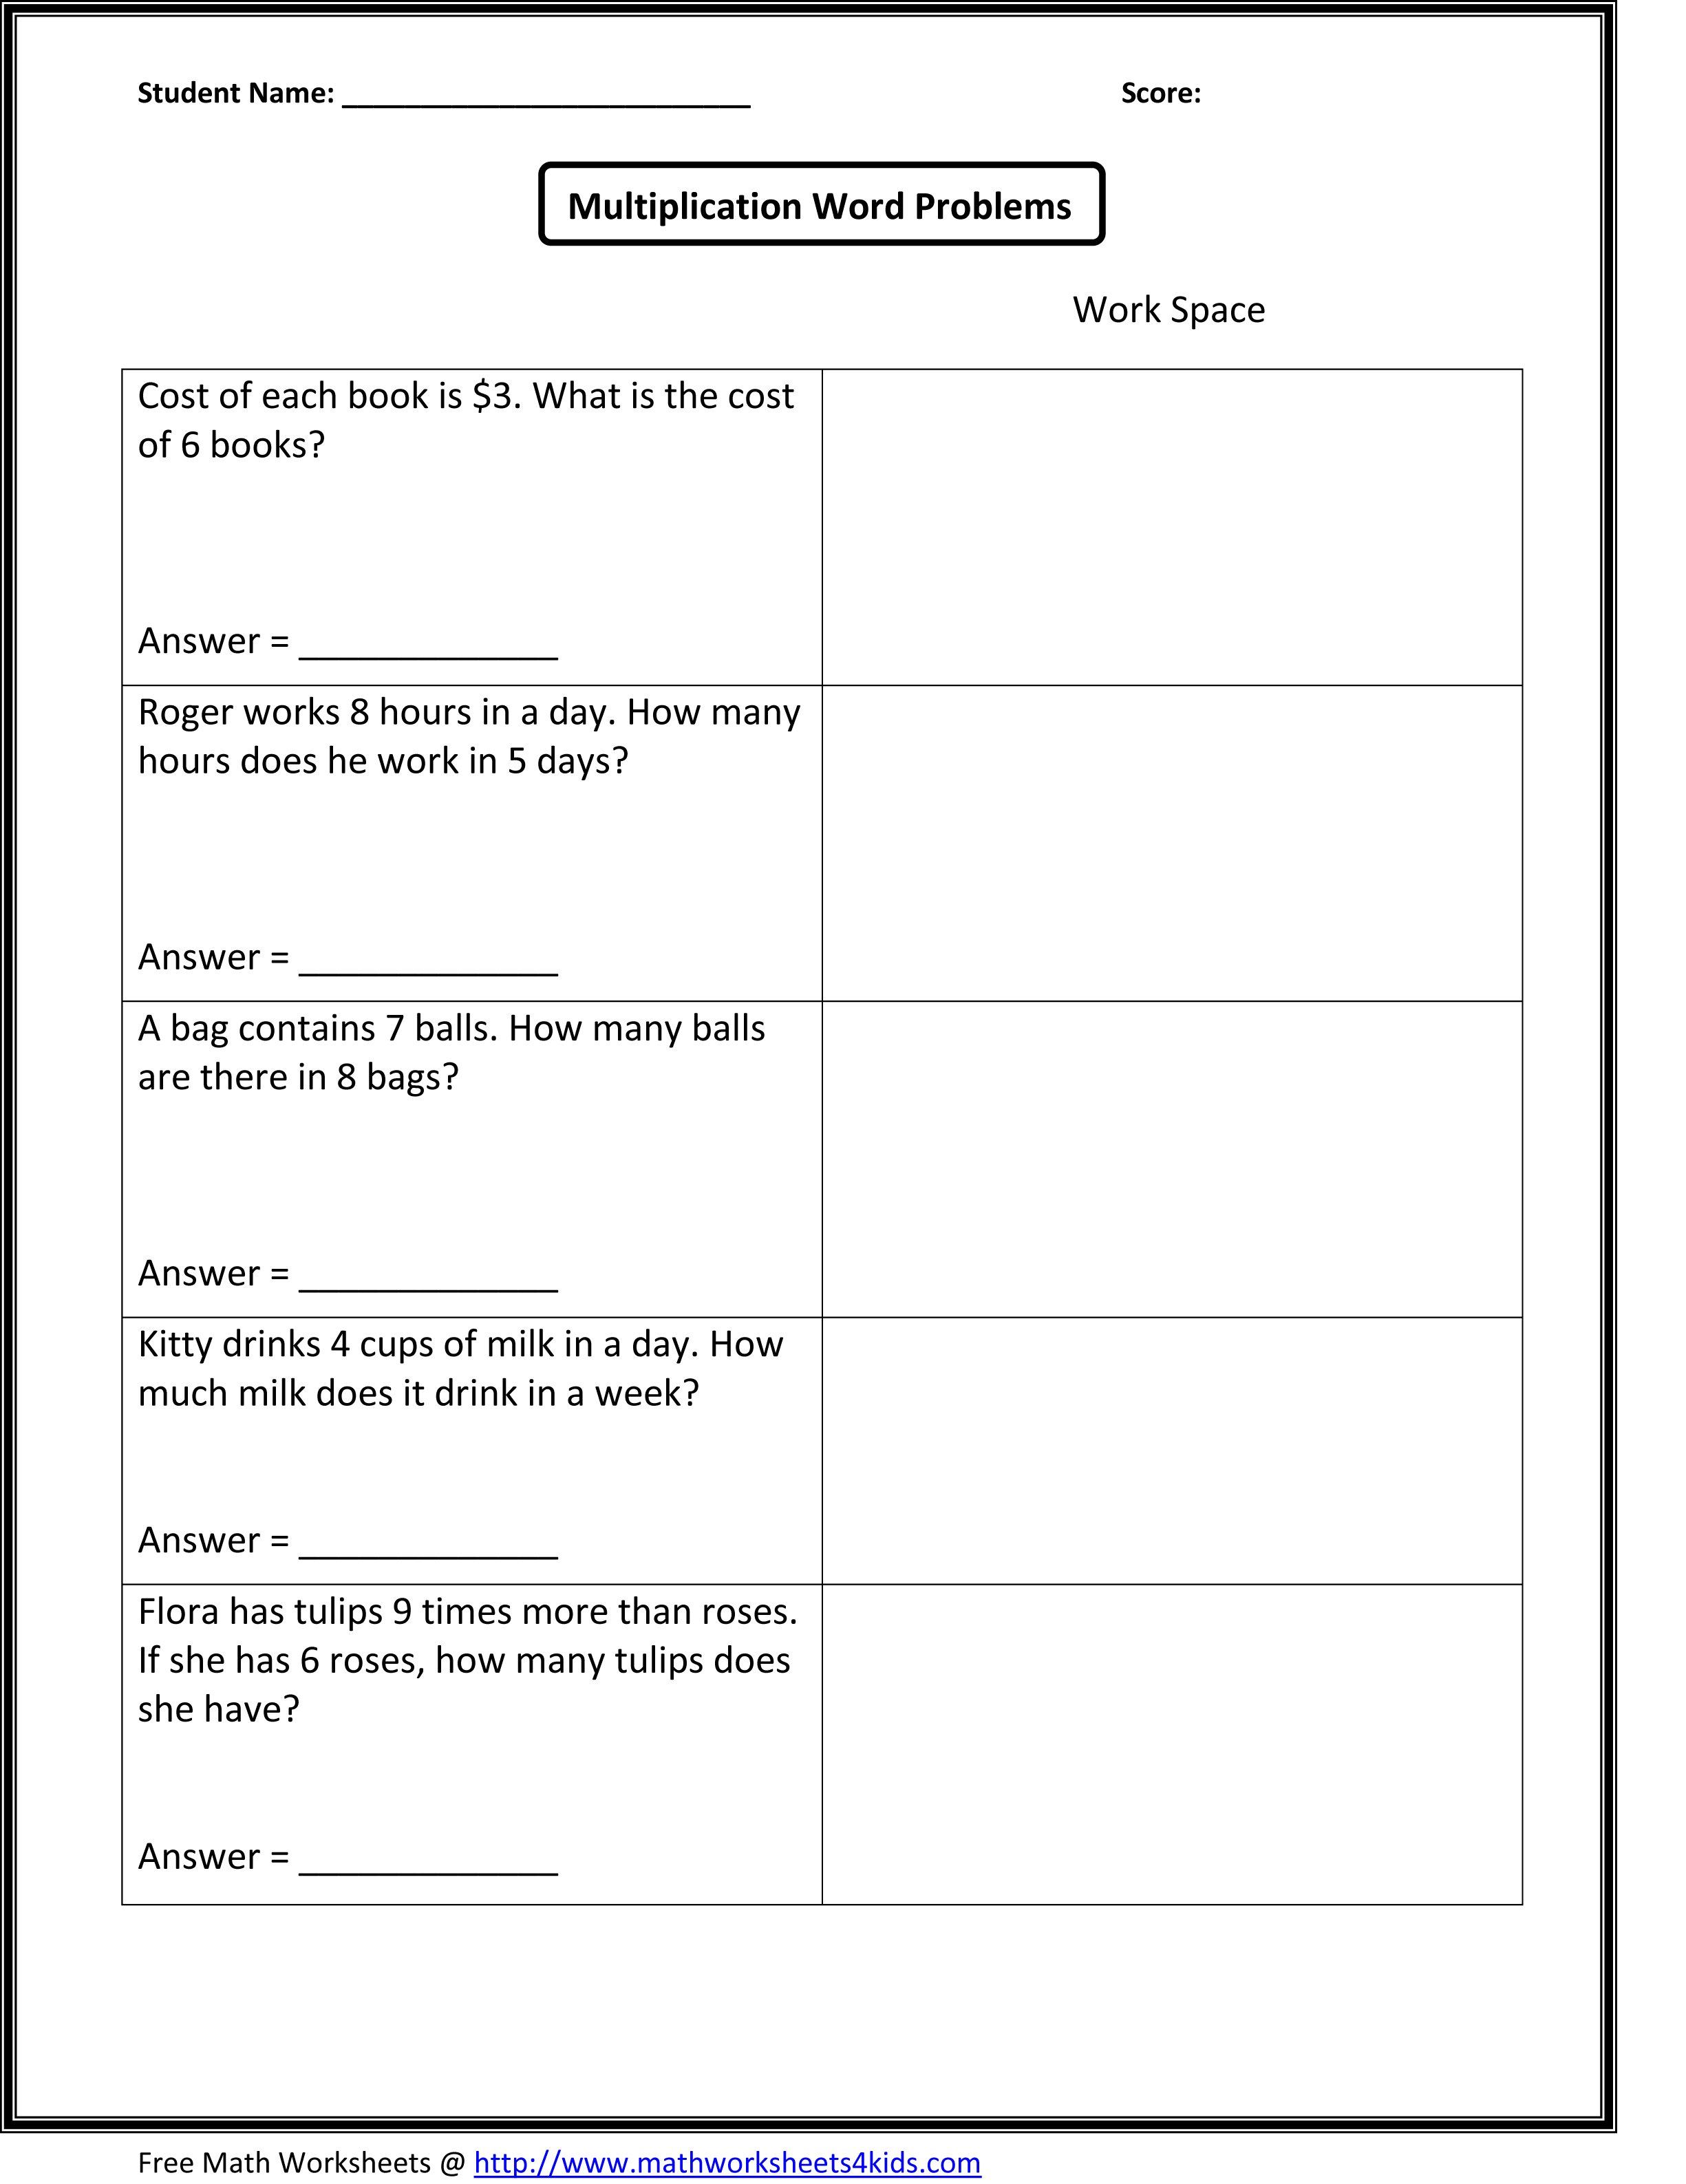 13 Angles Word Problems Worksheets Worksheeto